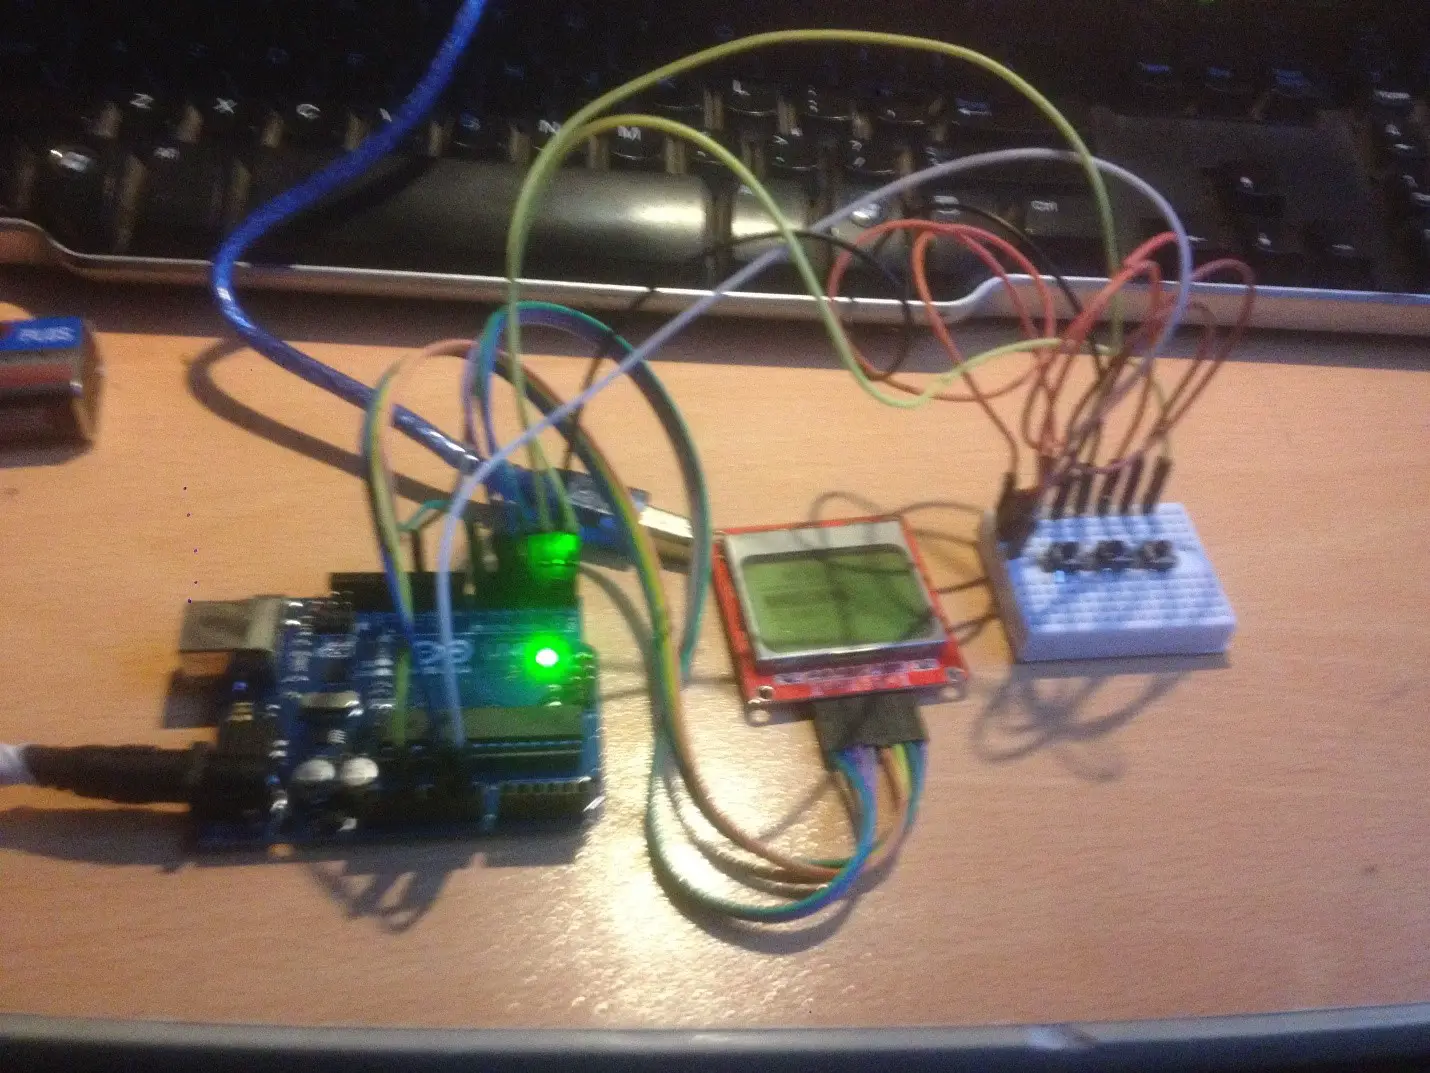 Drive and Build Project with Nokia 5110 LCD using Arduino